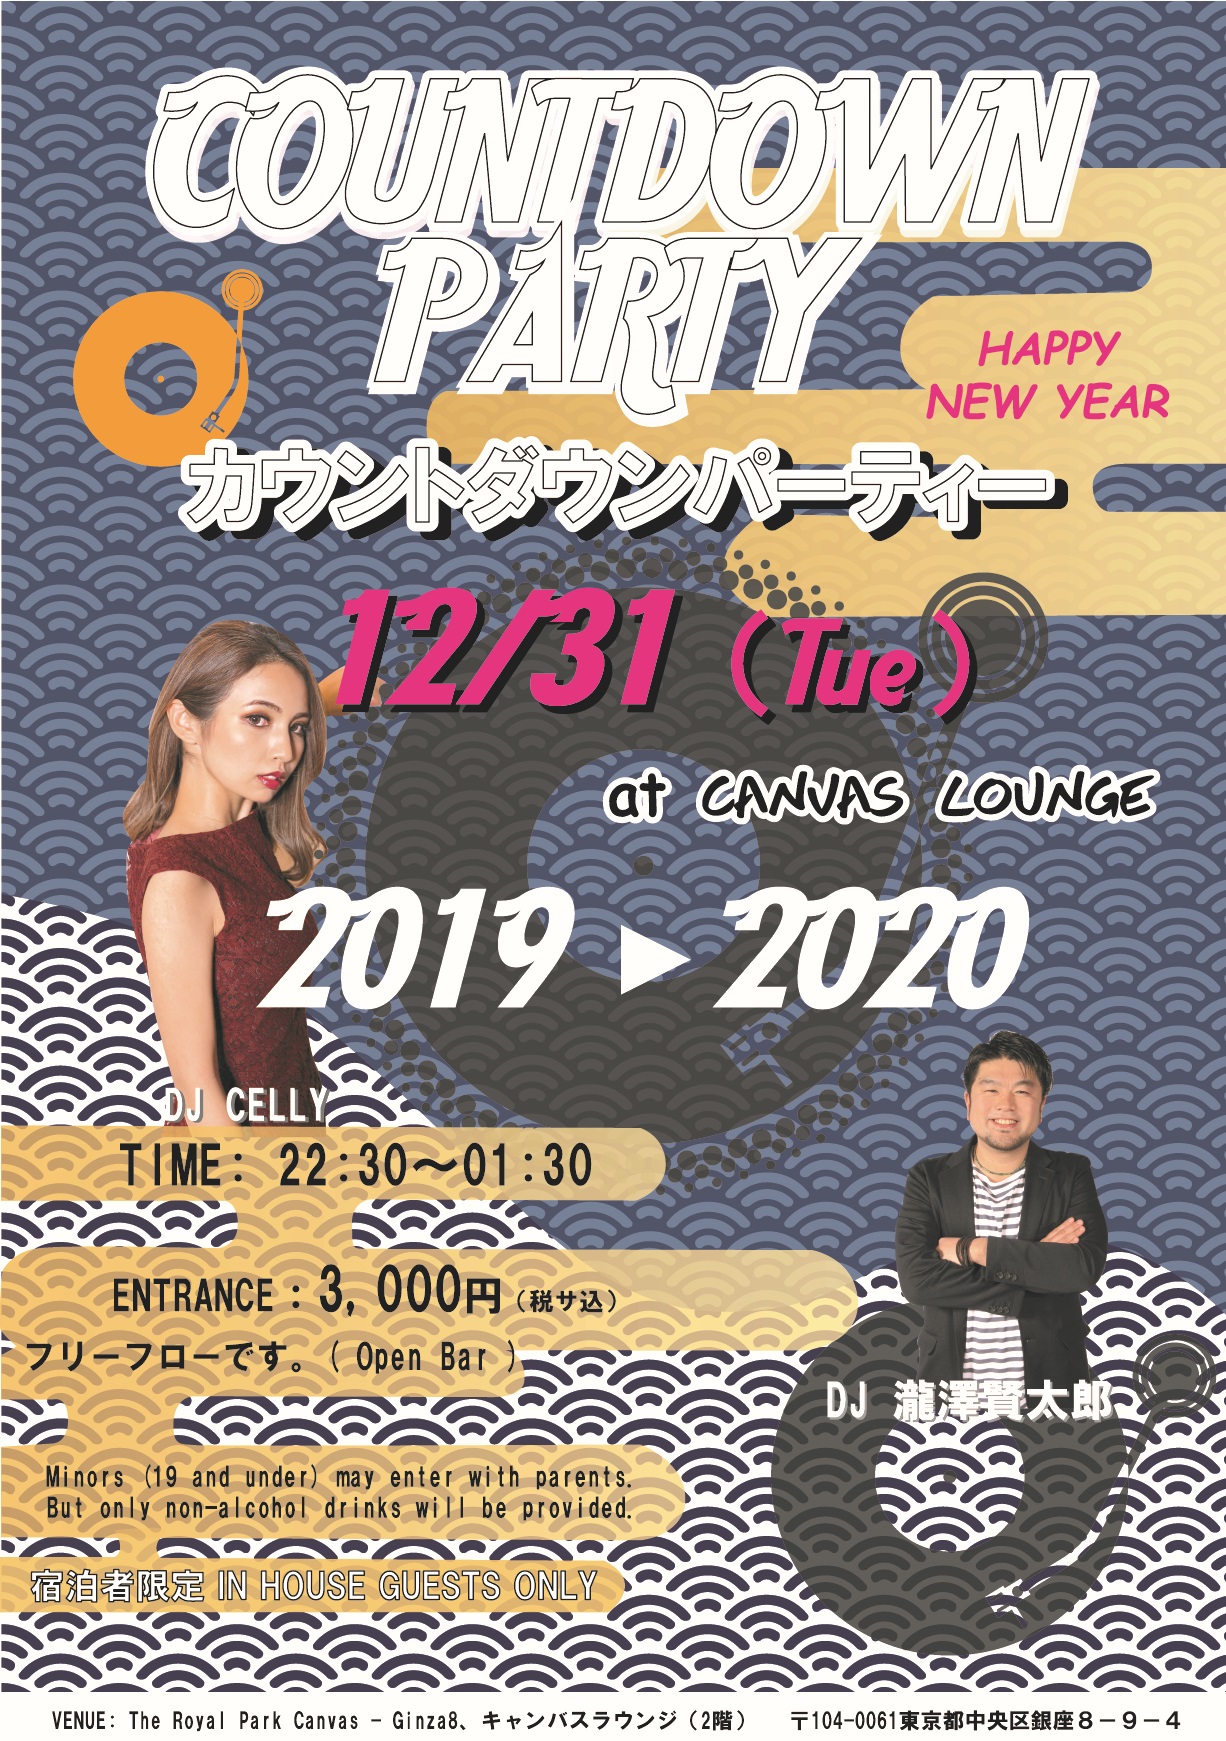 31st December(Tue)  22:30-01:30 “Countdown Party”at The Royal Park Canvas – Ginza 8